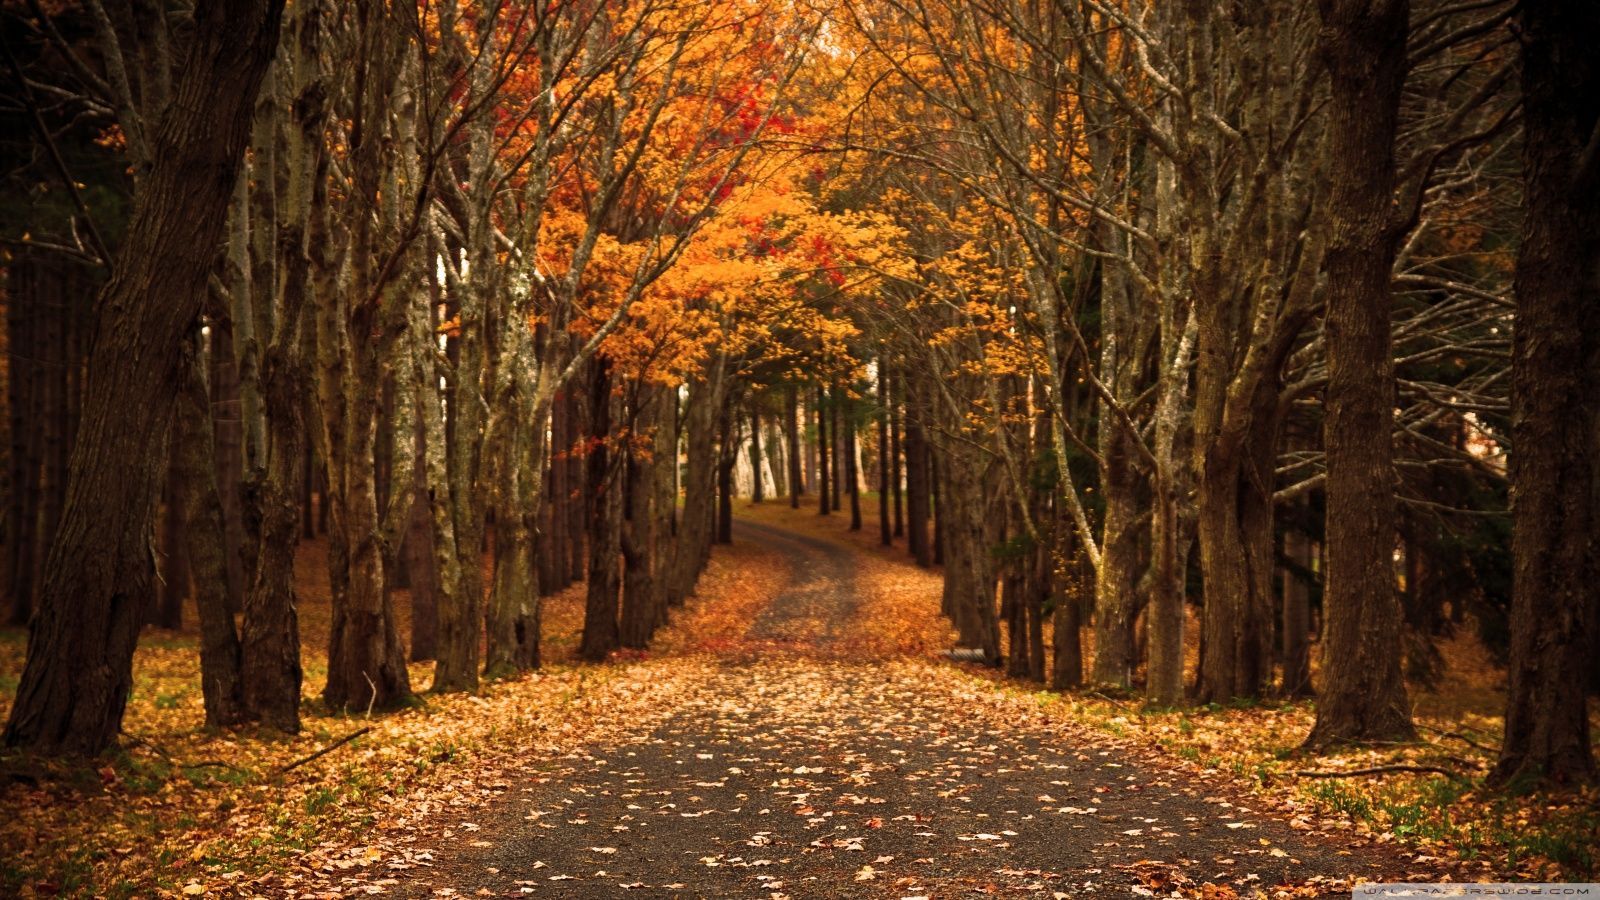 A road with trees and leaves on it - Vintage fall